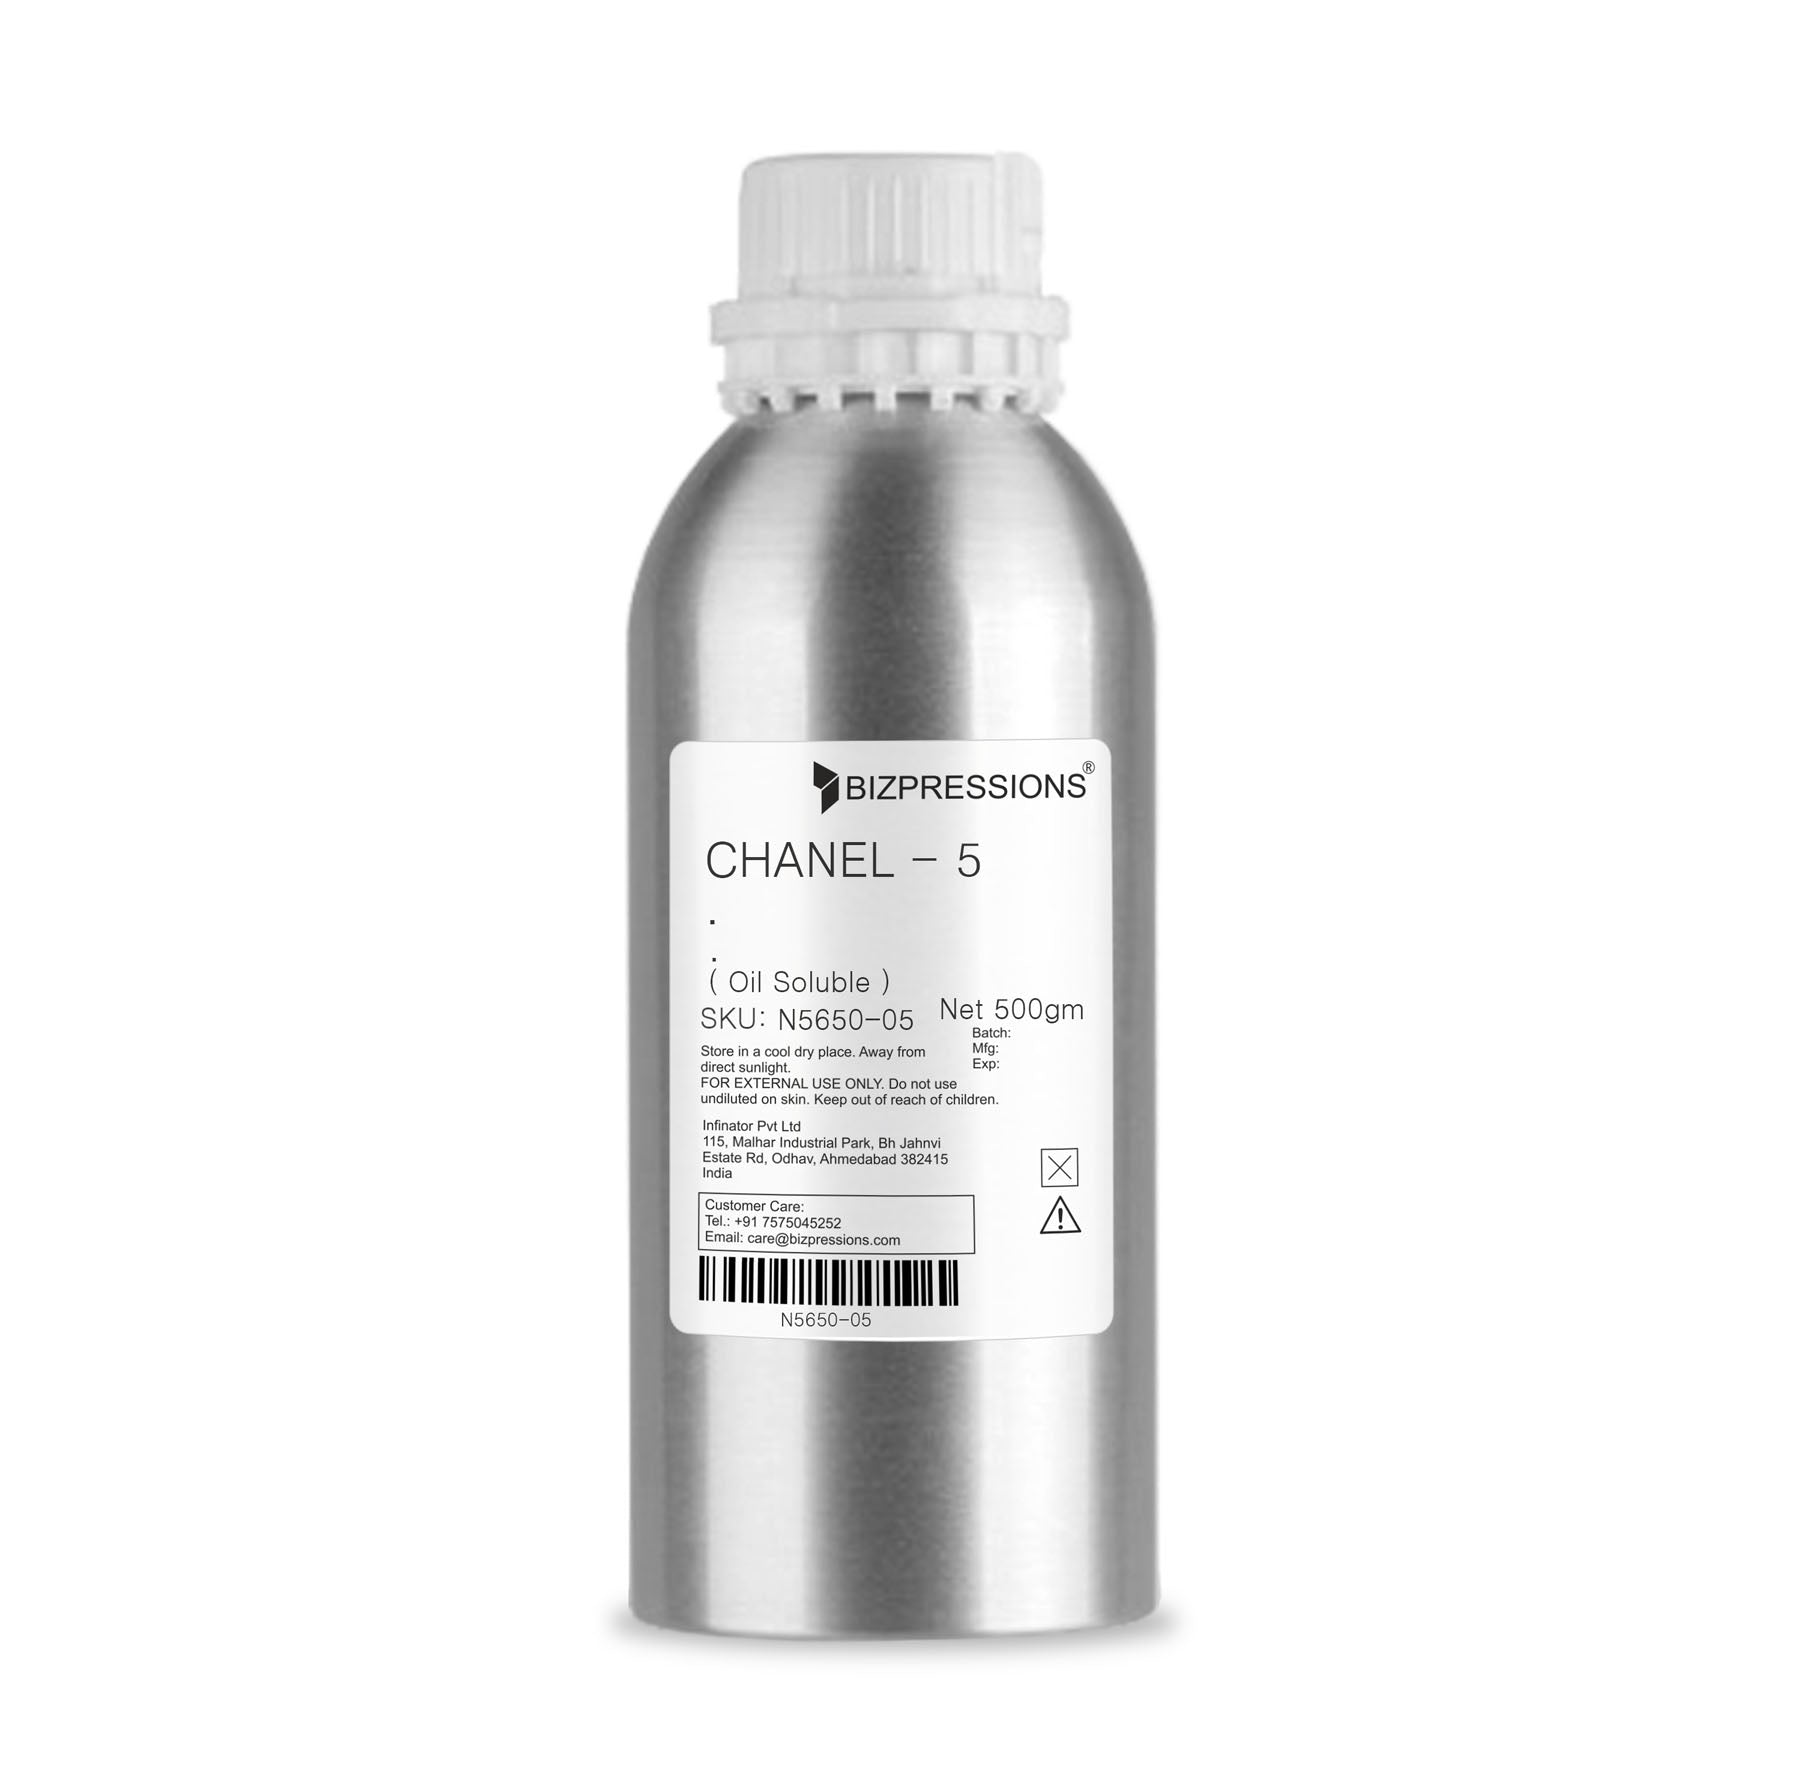 CHANEL - 5 - Fragrance ( Oil Soluble ) - 500 gm